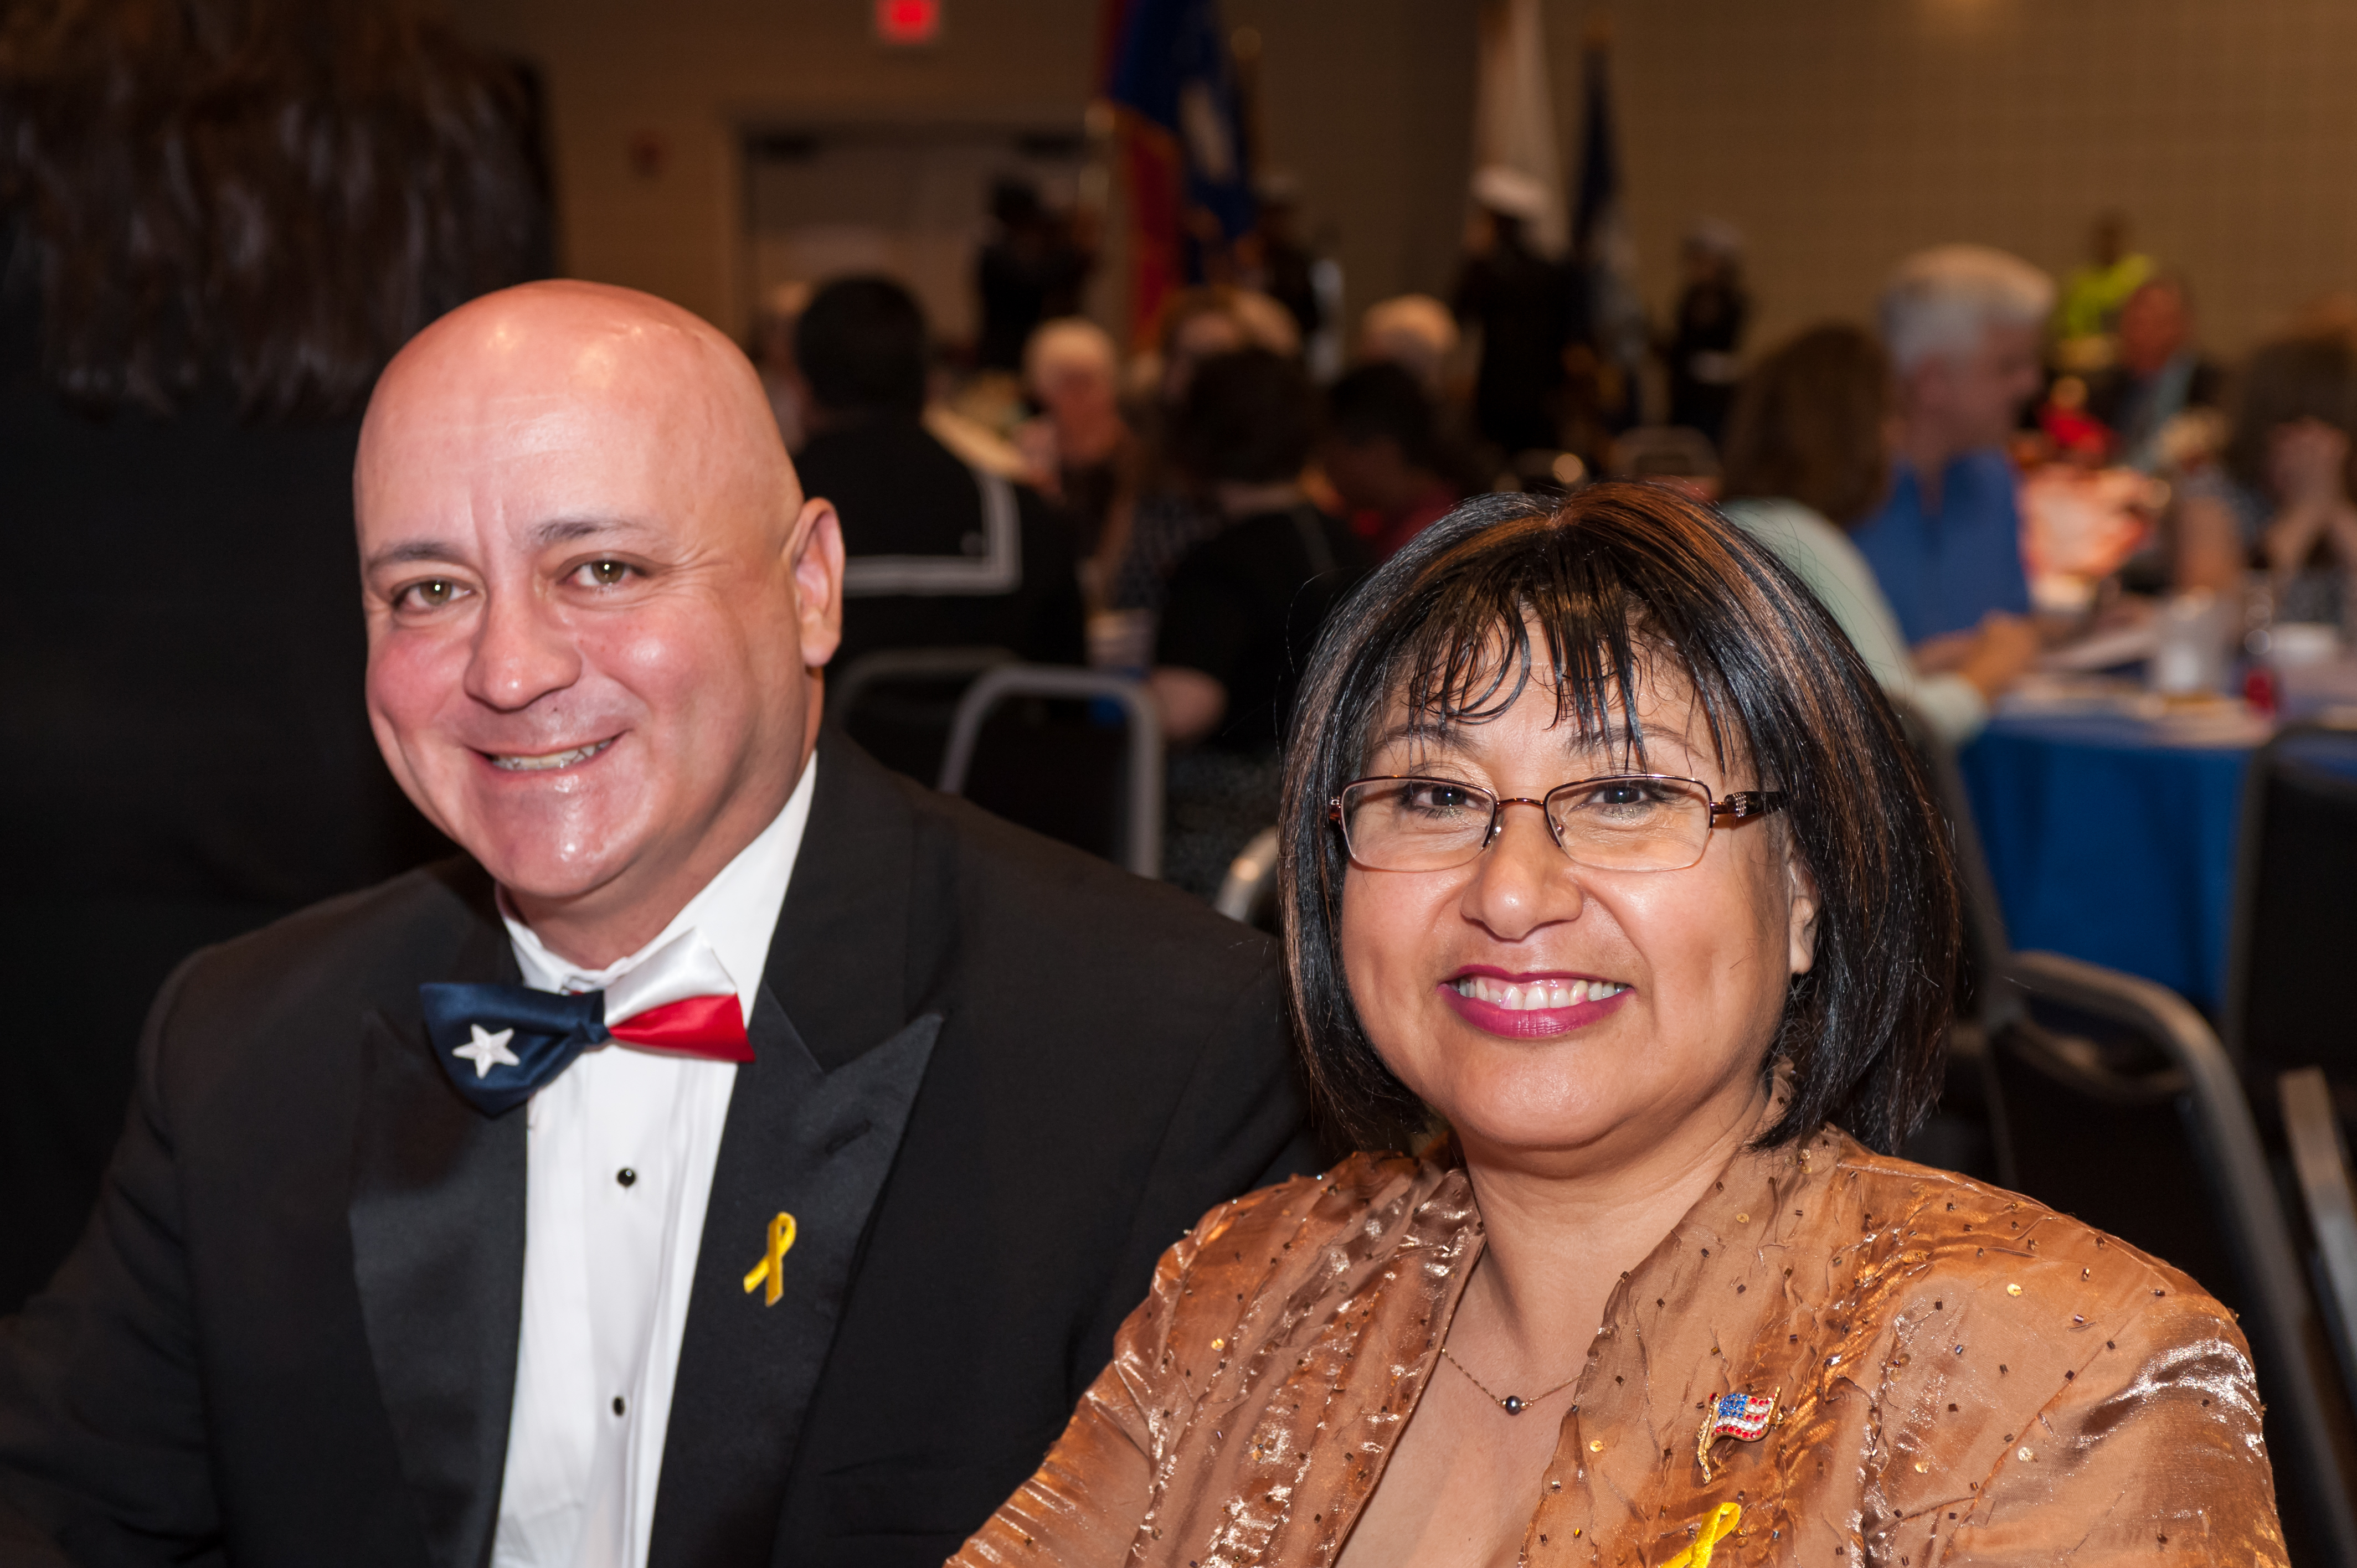 Shaie Williams for AGN Media. Francisco S Linan JR. and Rosalind L Gomez at the Armed Forces Day Banquet  in Amarillo, TX Held at the Amarillo Civic Center on May 21, 2016.